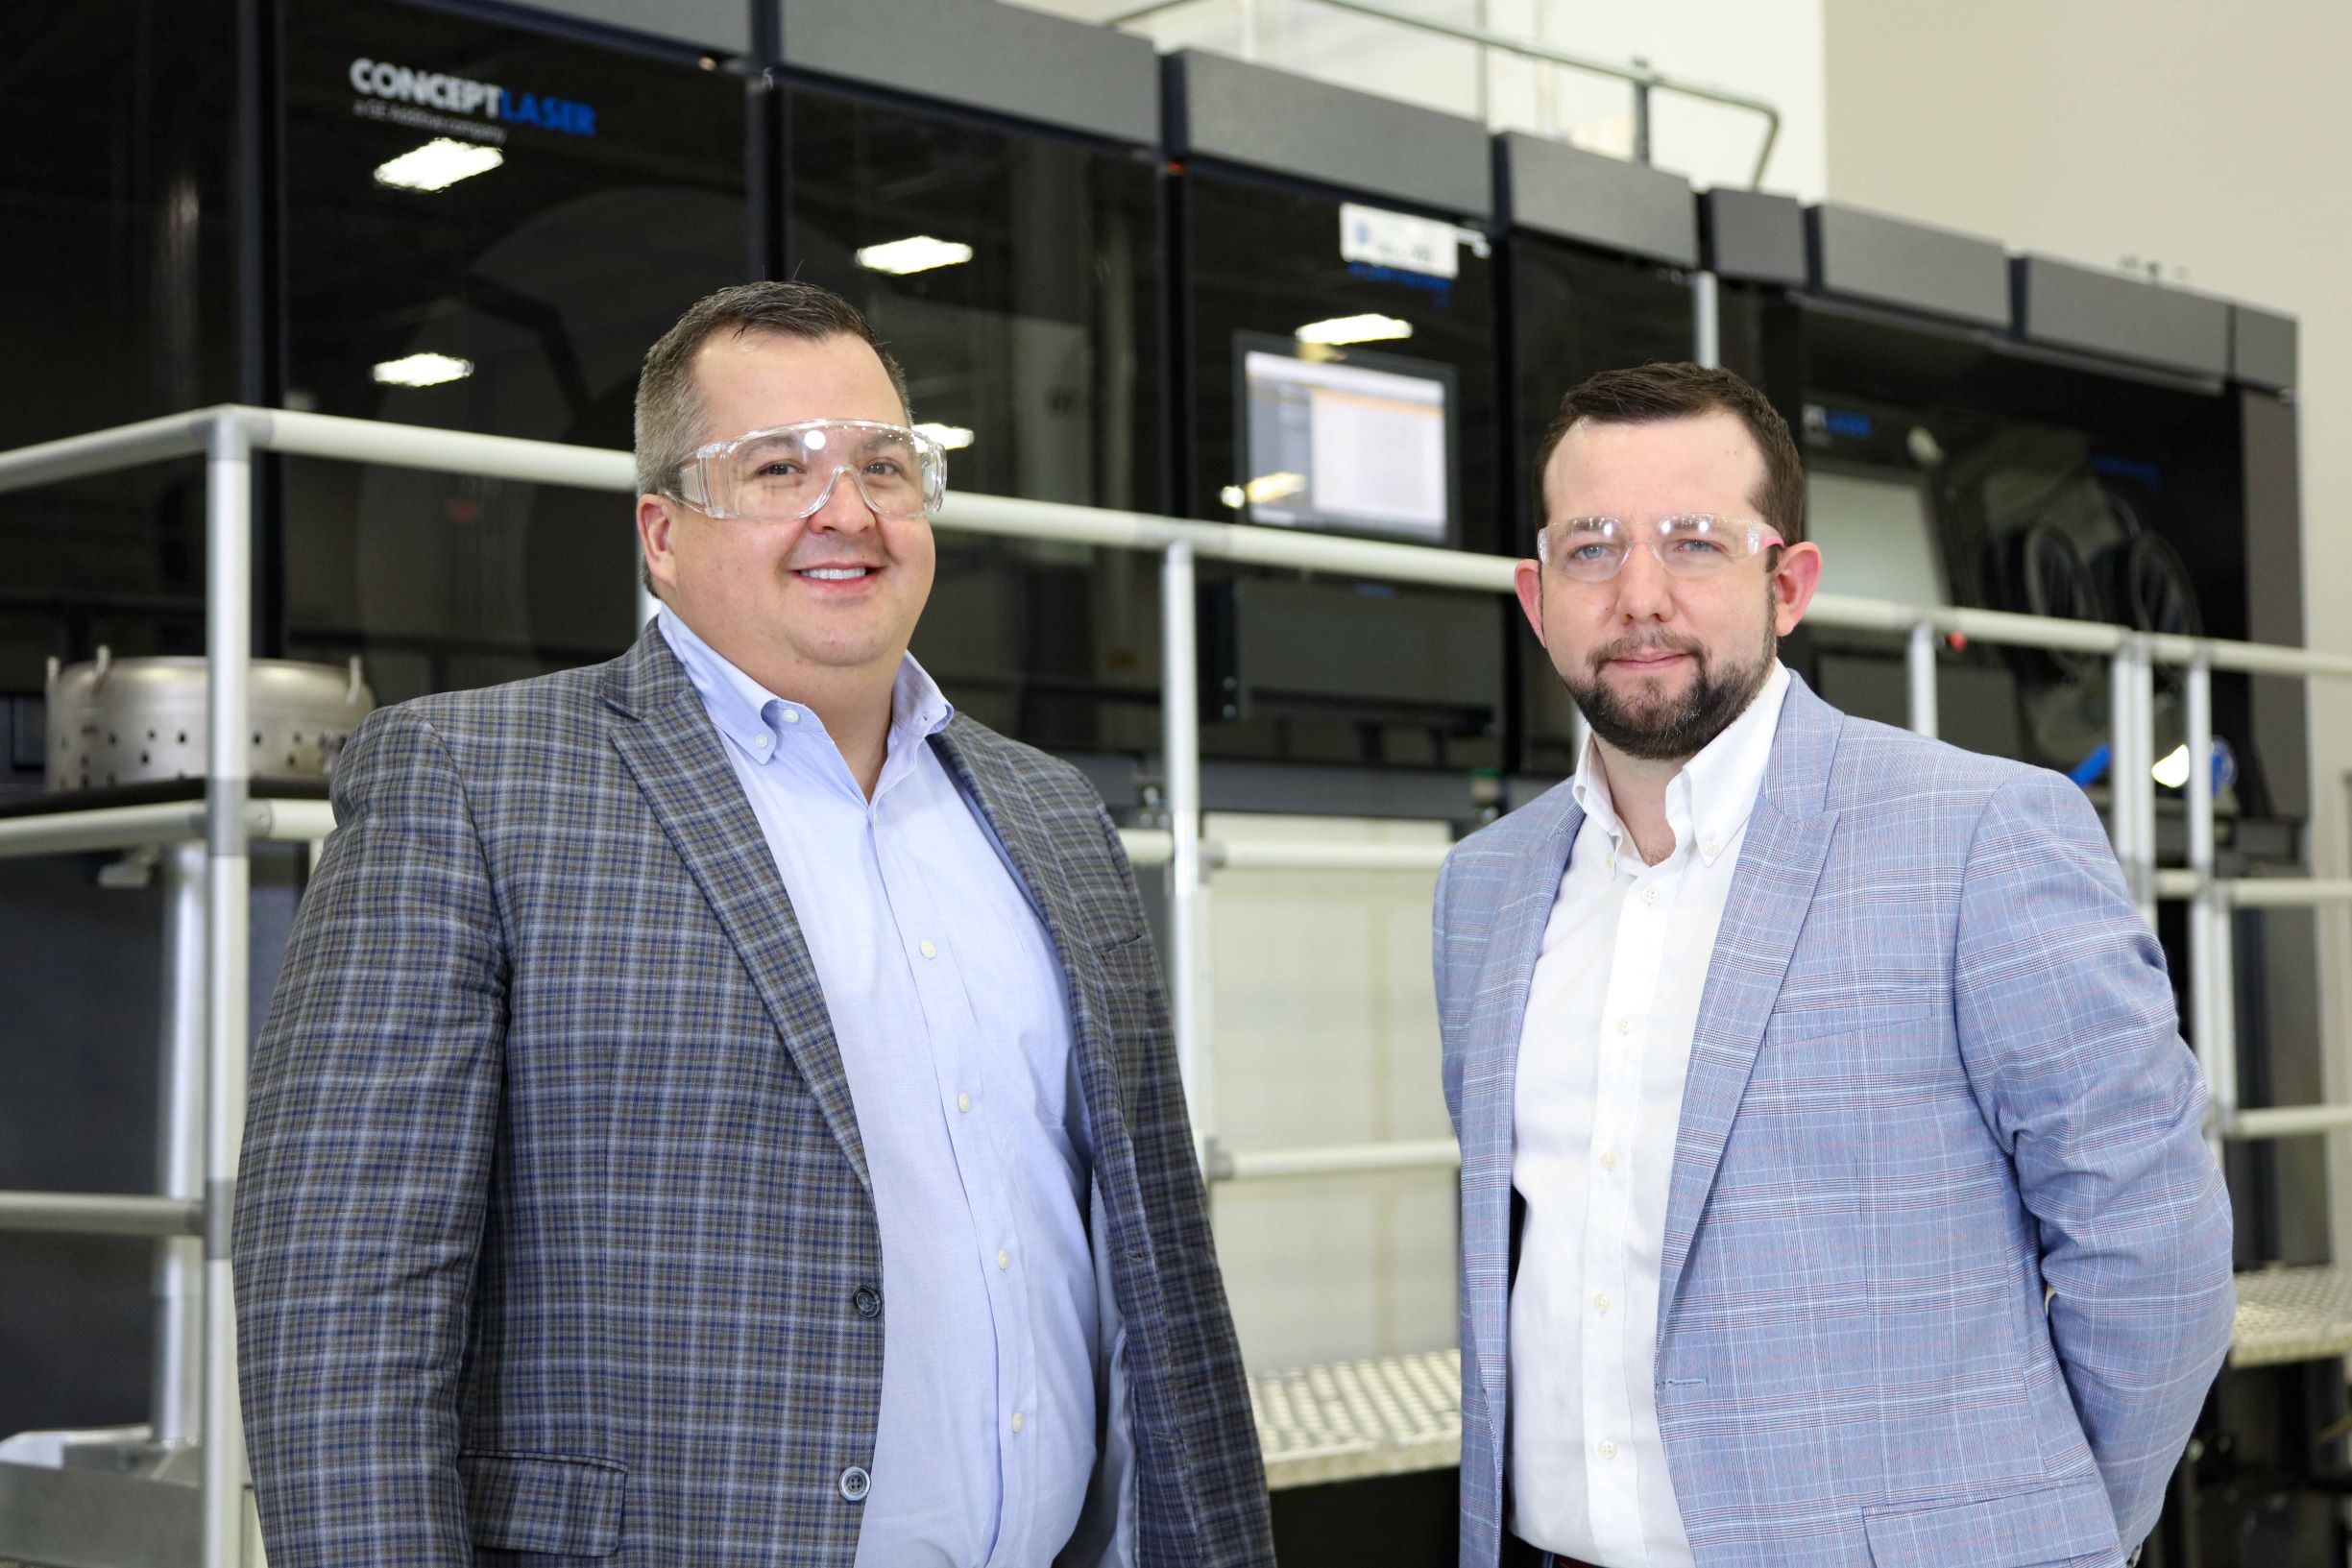 L-R Benito Trevino & Chris Philp, GE Aviation at ATC in West Chester, OH